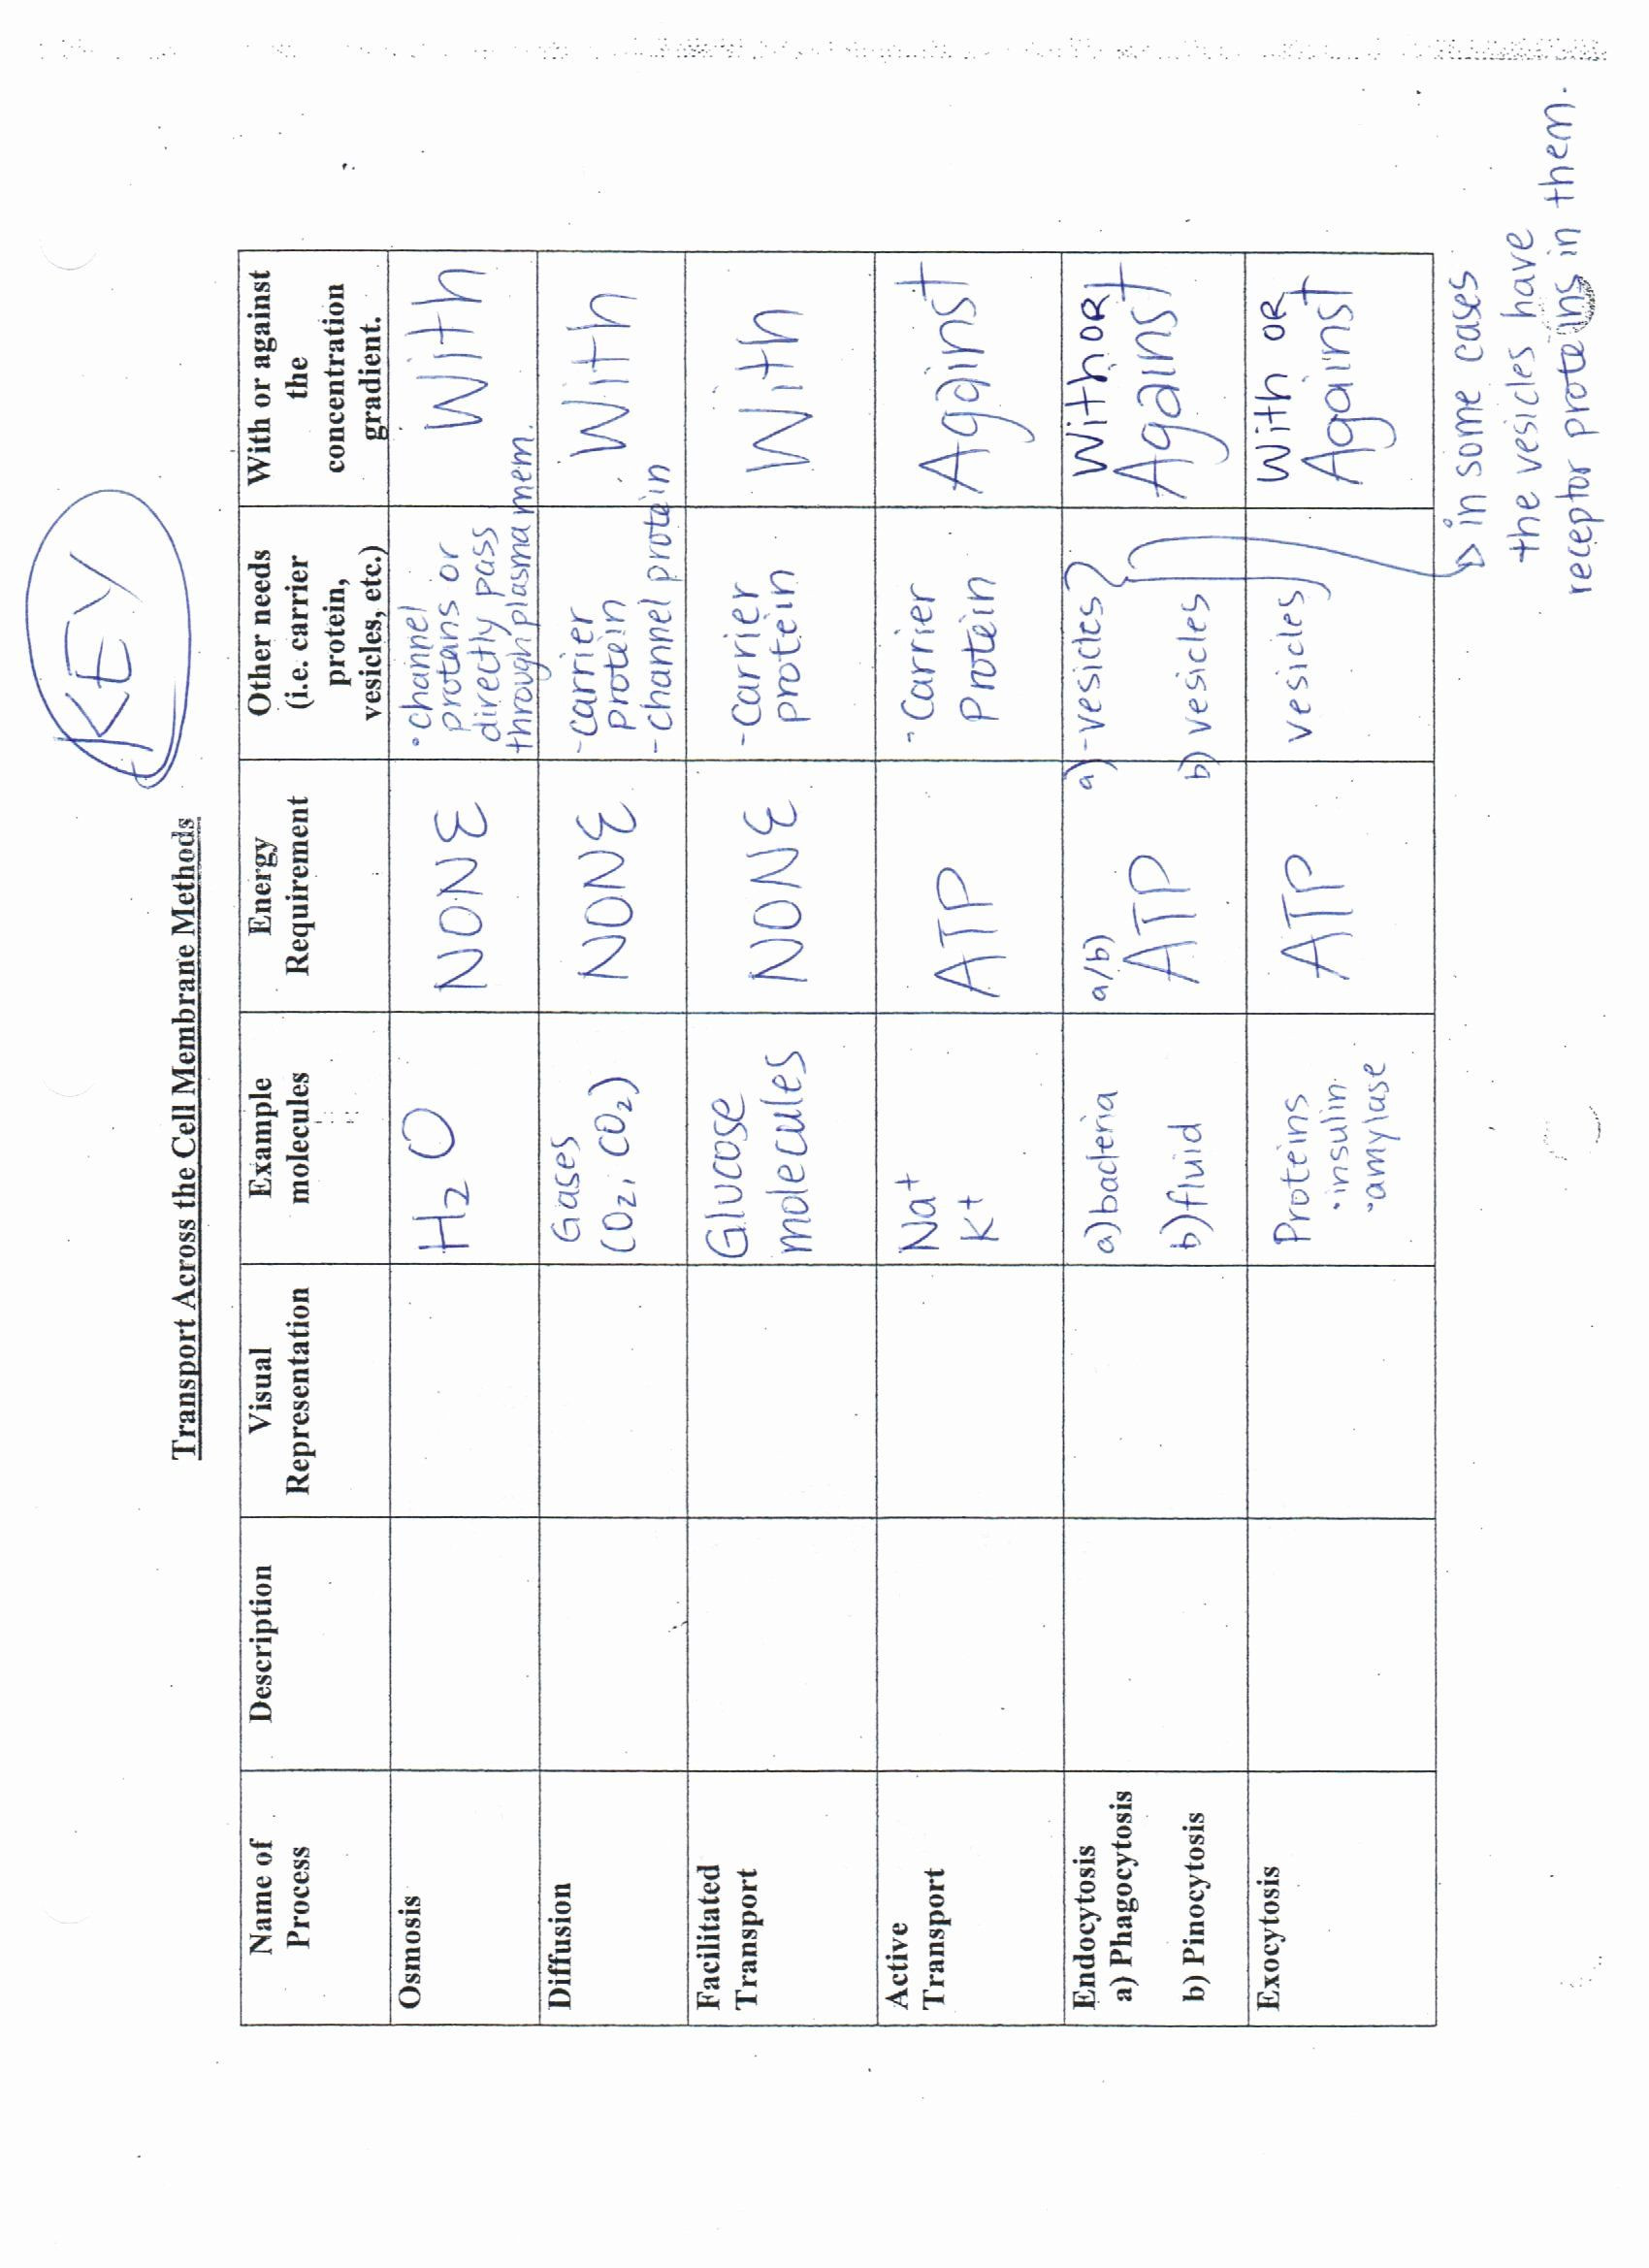 Cell Membrane Images Worksheet Answers 50 Cell Membrane Worksheet Answers In 2020